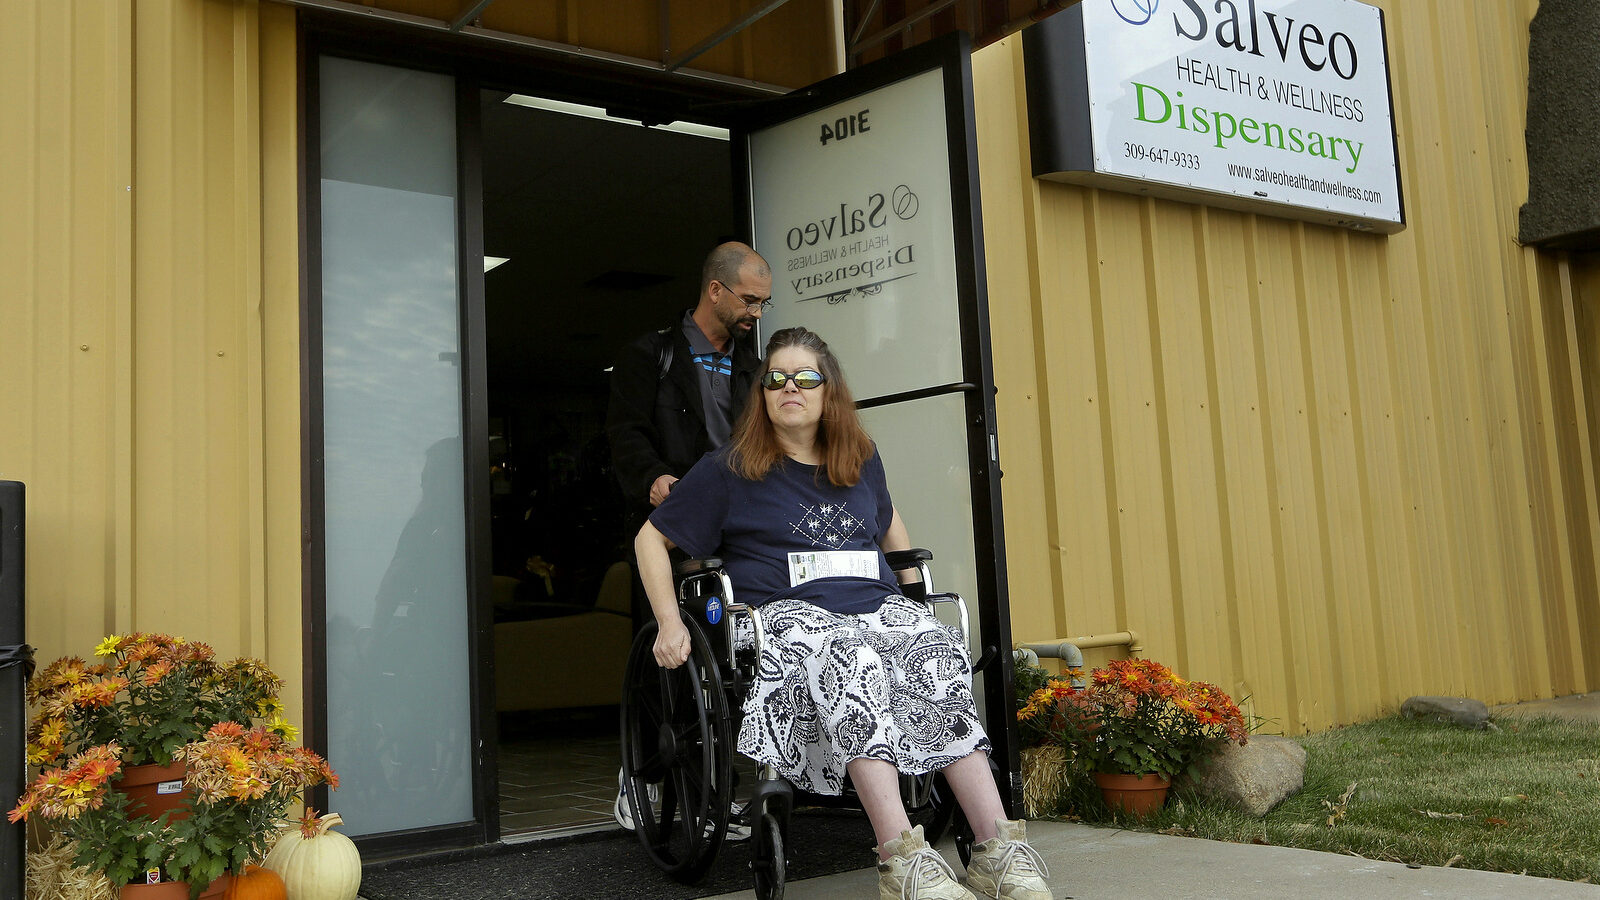 Shamay Flaharty, of Lewiston, Ill., who has multiple sclerosis and is hoping cannabis will help ease her pain and headaches, leaves with Eric Sweatt, partner and manager of Salveo Health and Wellness. (AP Photo/Seth Perlman)